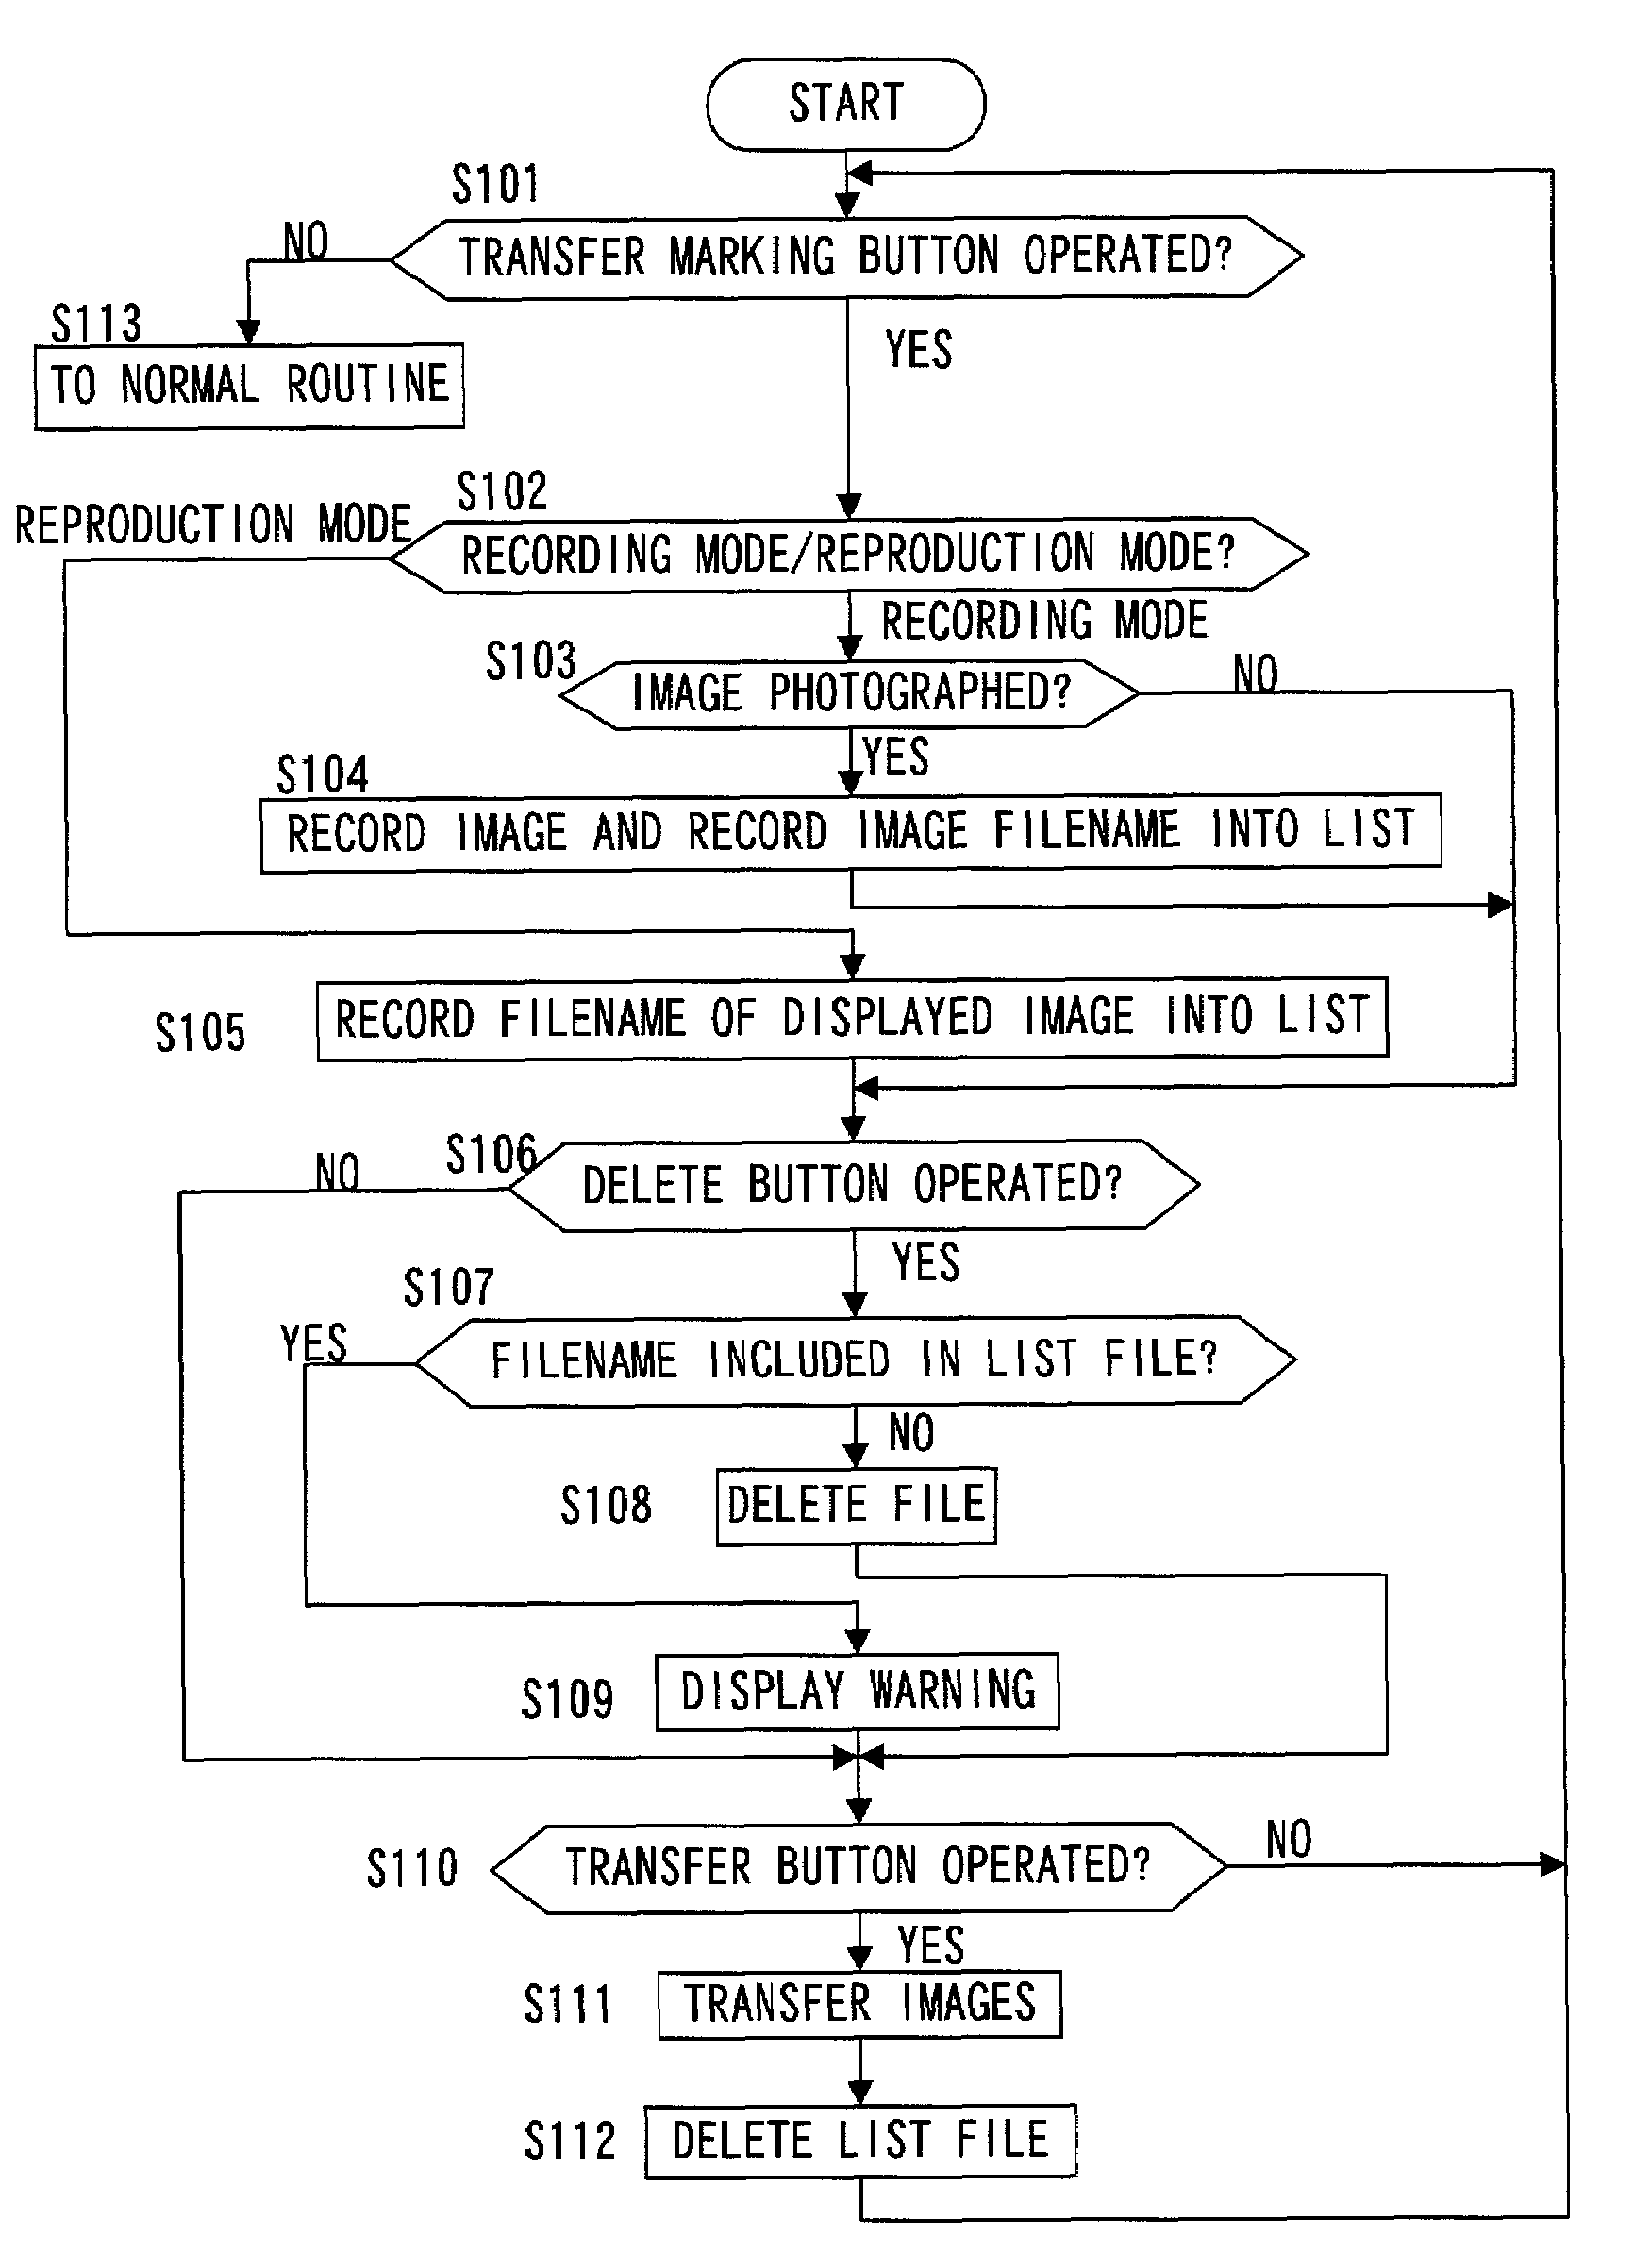 Electronic image processing device and system for image data transfer operation